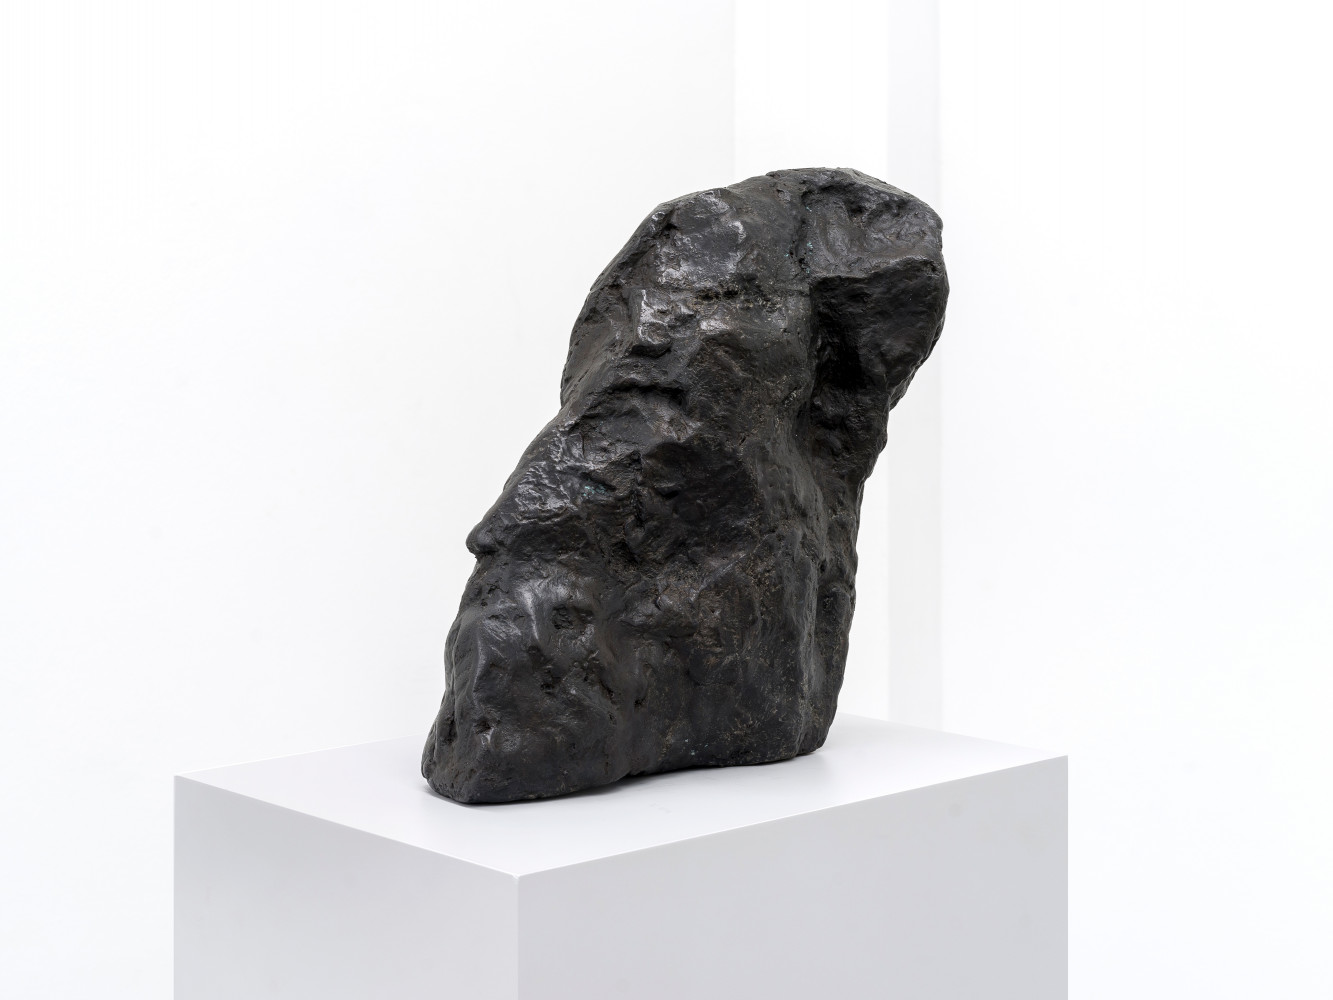 a sculpture by William Tucker in the form of a head